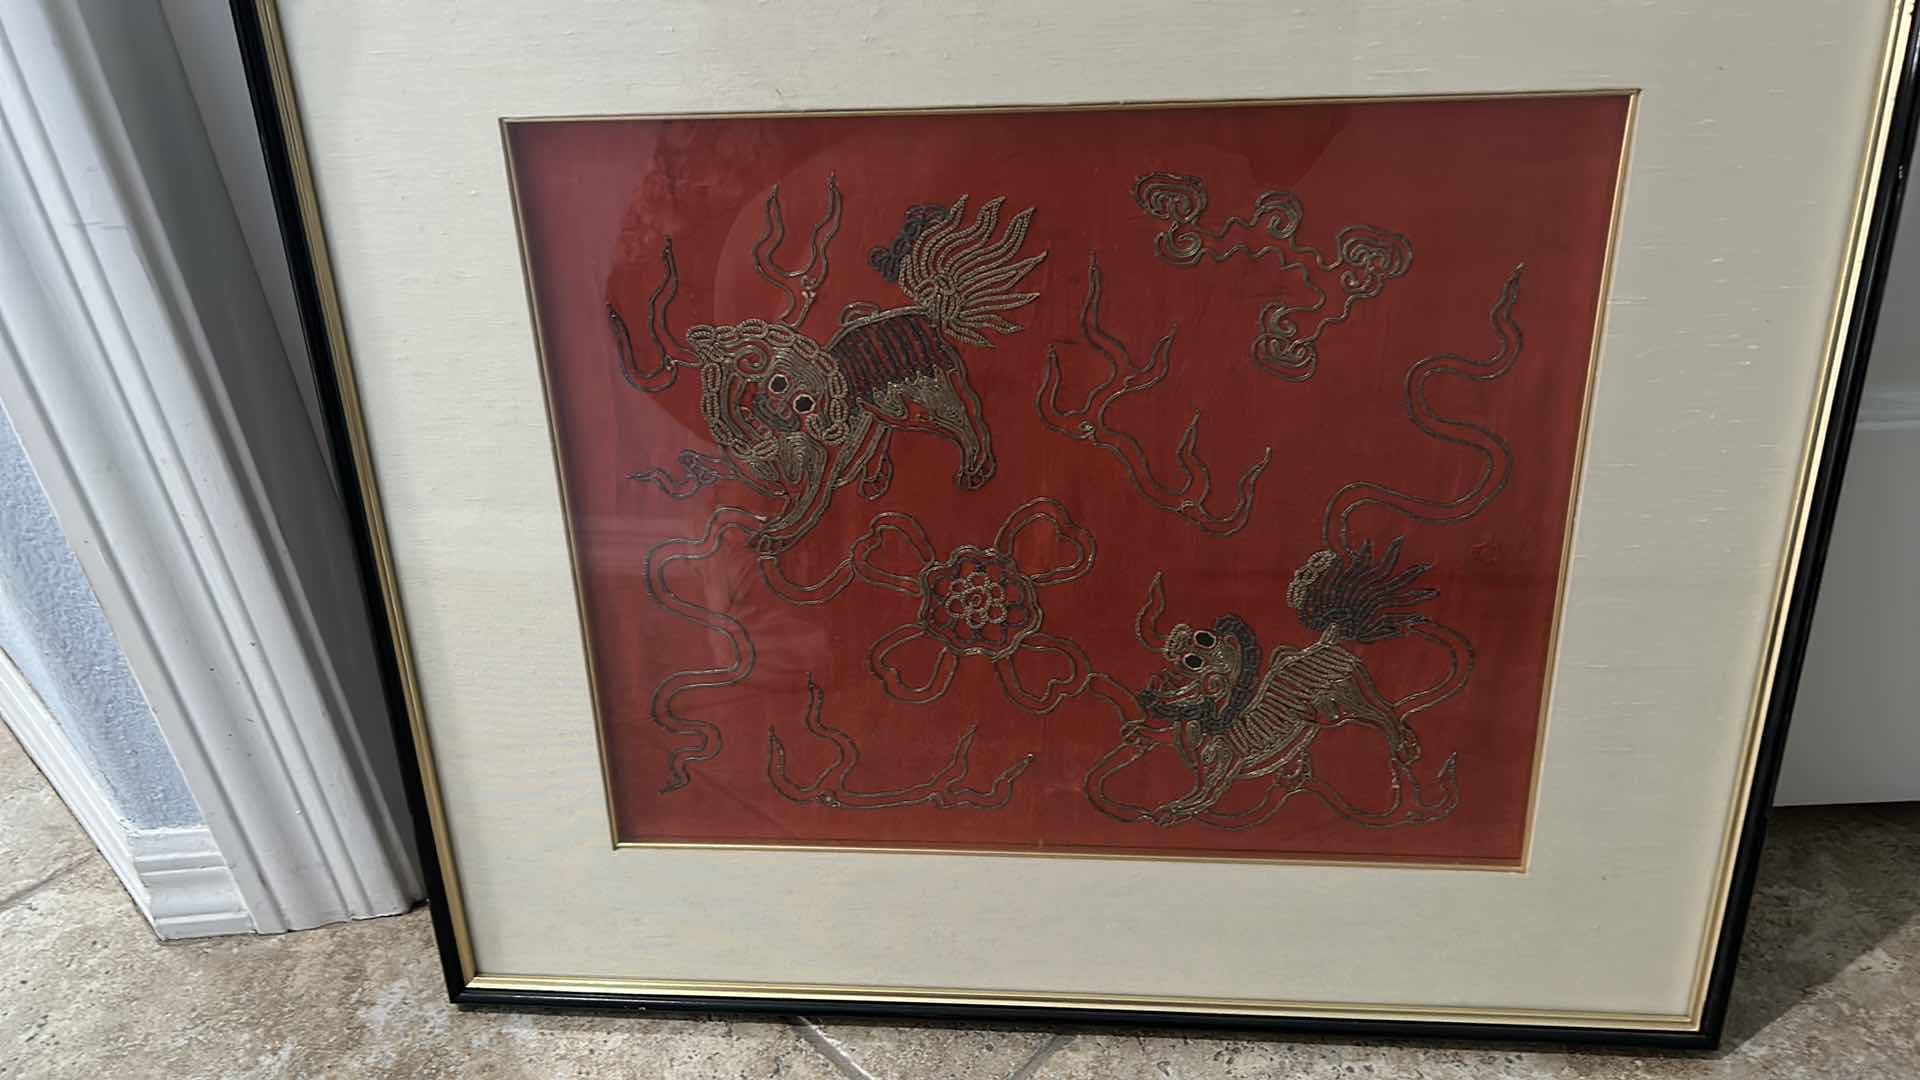 Photo 5 of VINTAGE CHINESE SILK FABRIC WITH SILK EMROIDERY FRAMED ARTWORK 21” x 25”